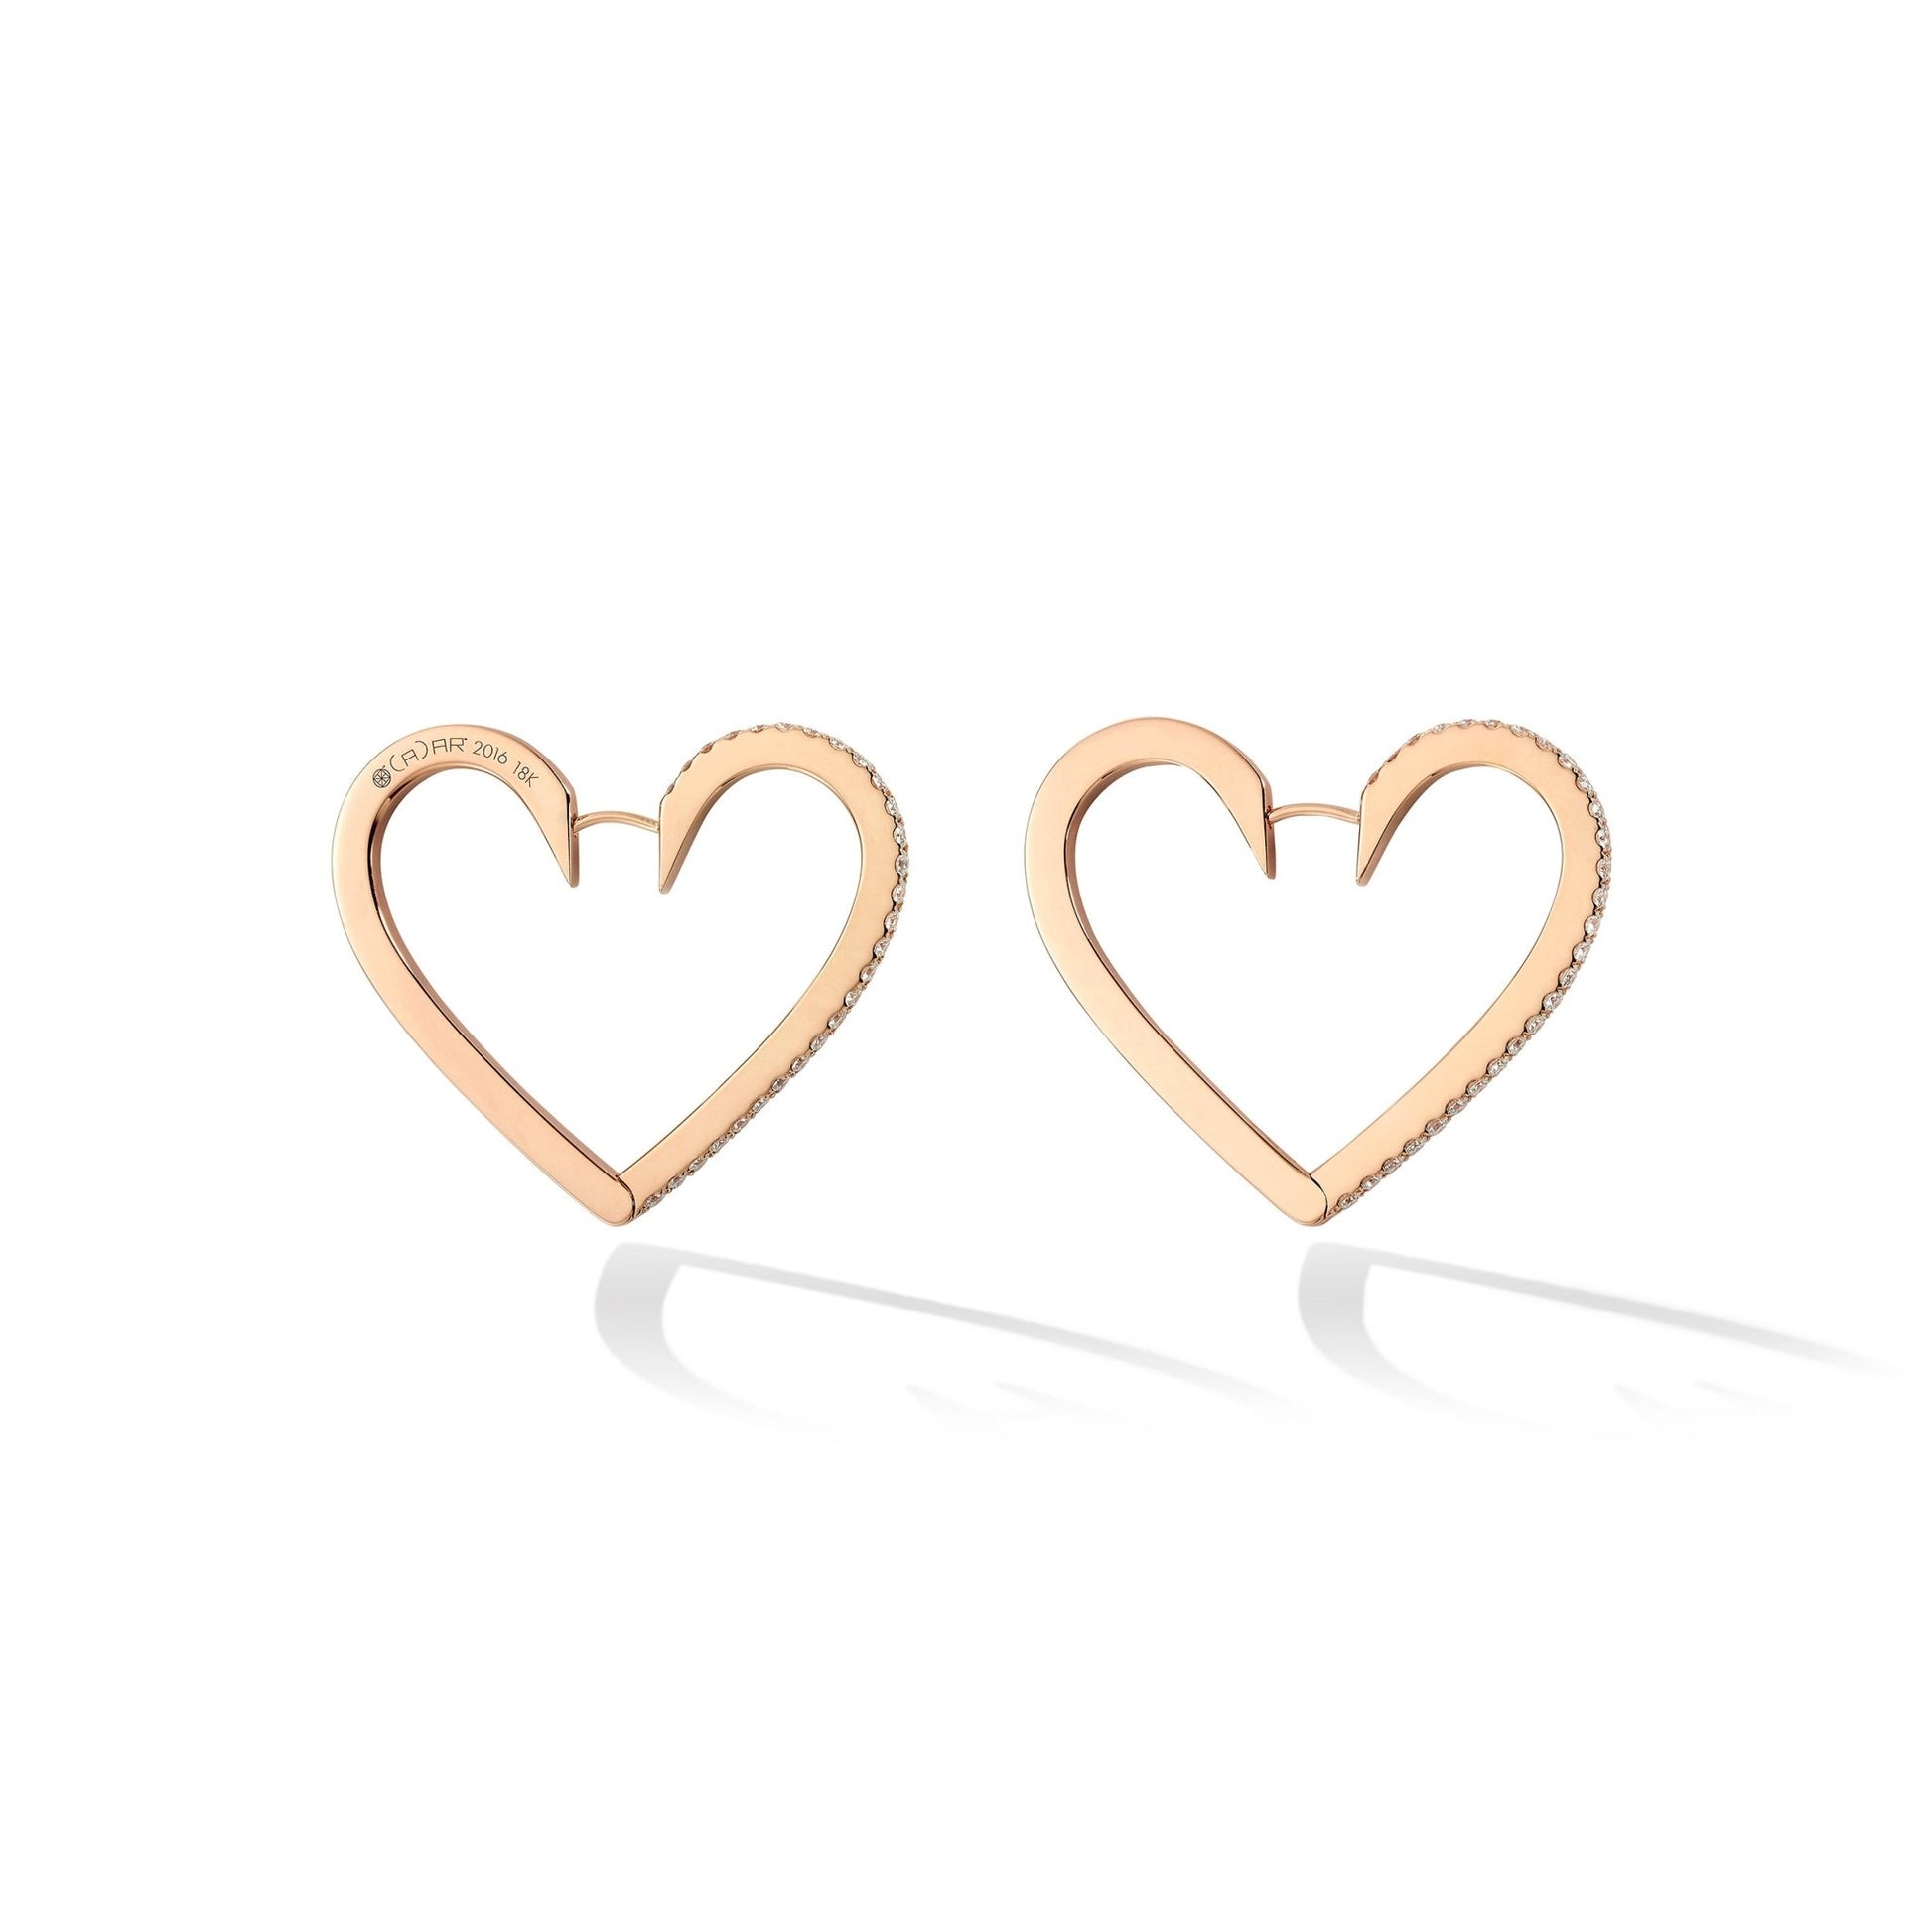 Large Rose Gold Endless Hoop Earrings with White Diamonds - Cadar